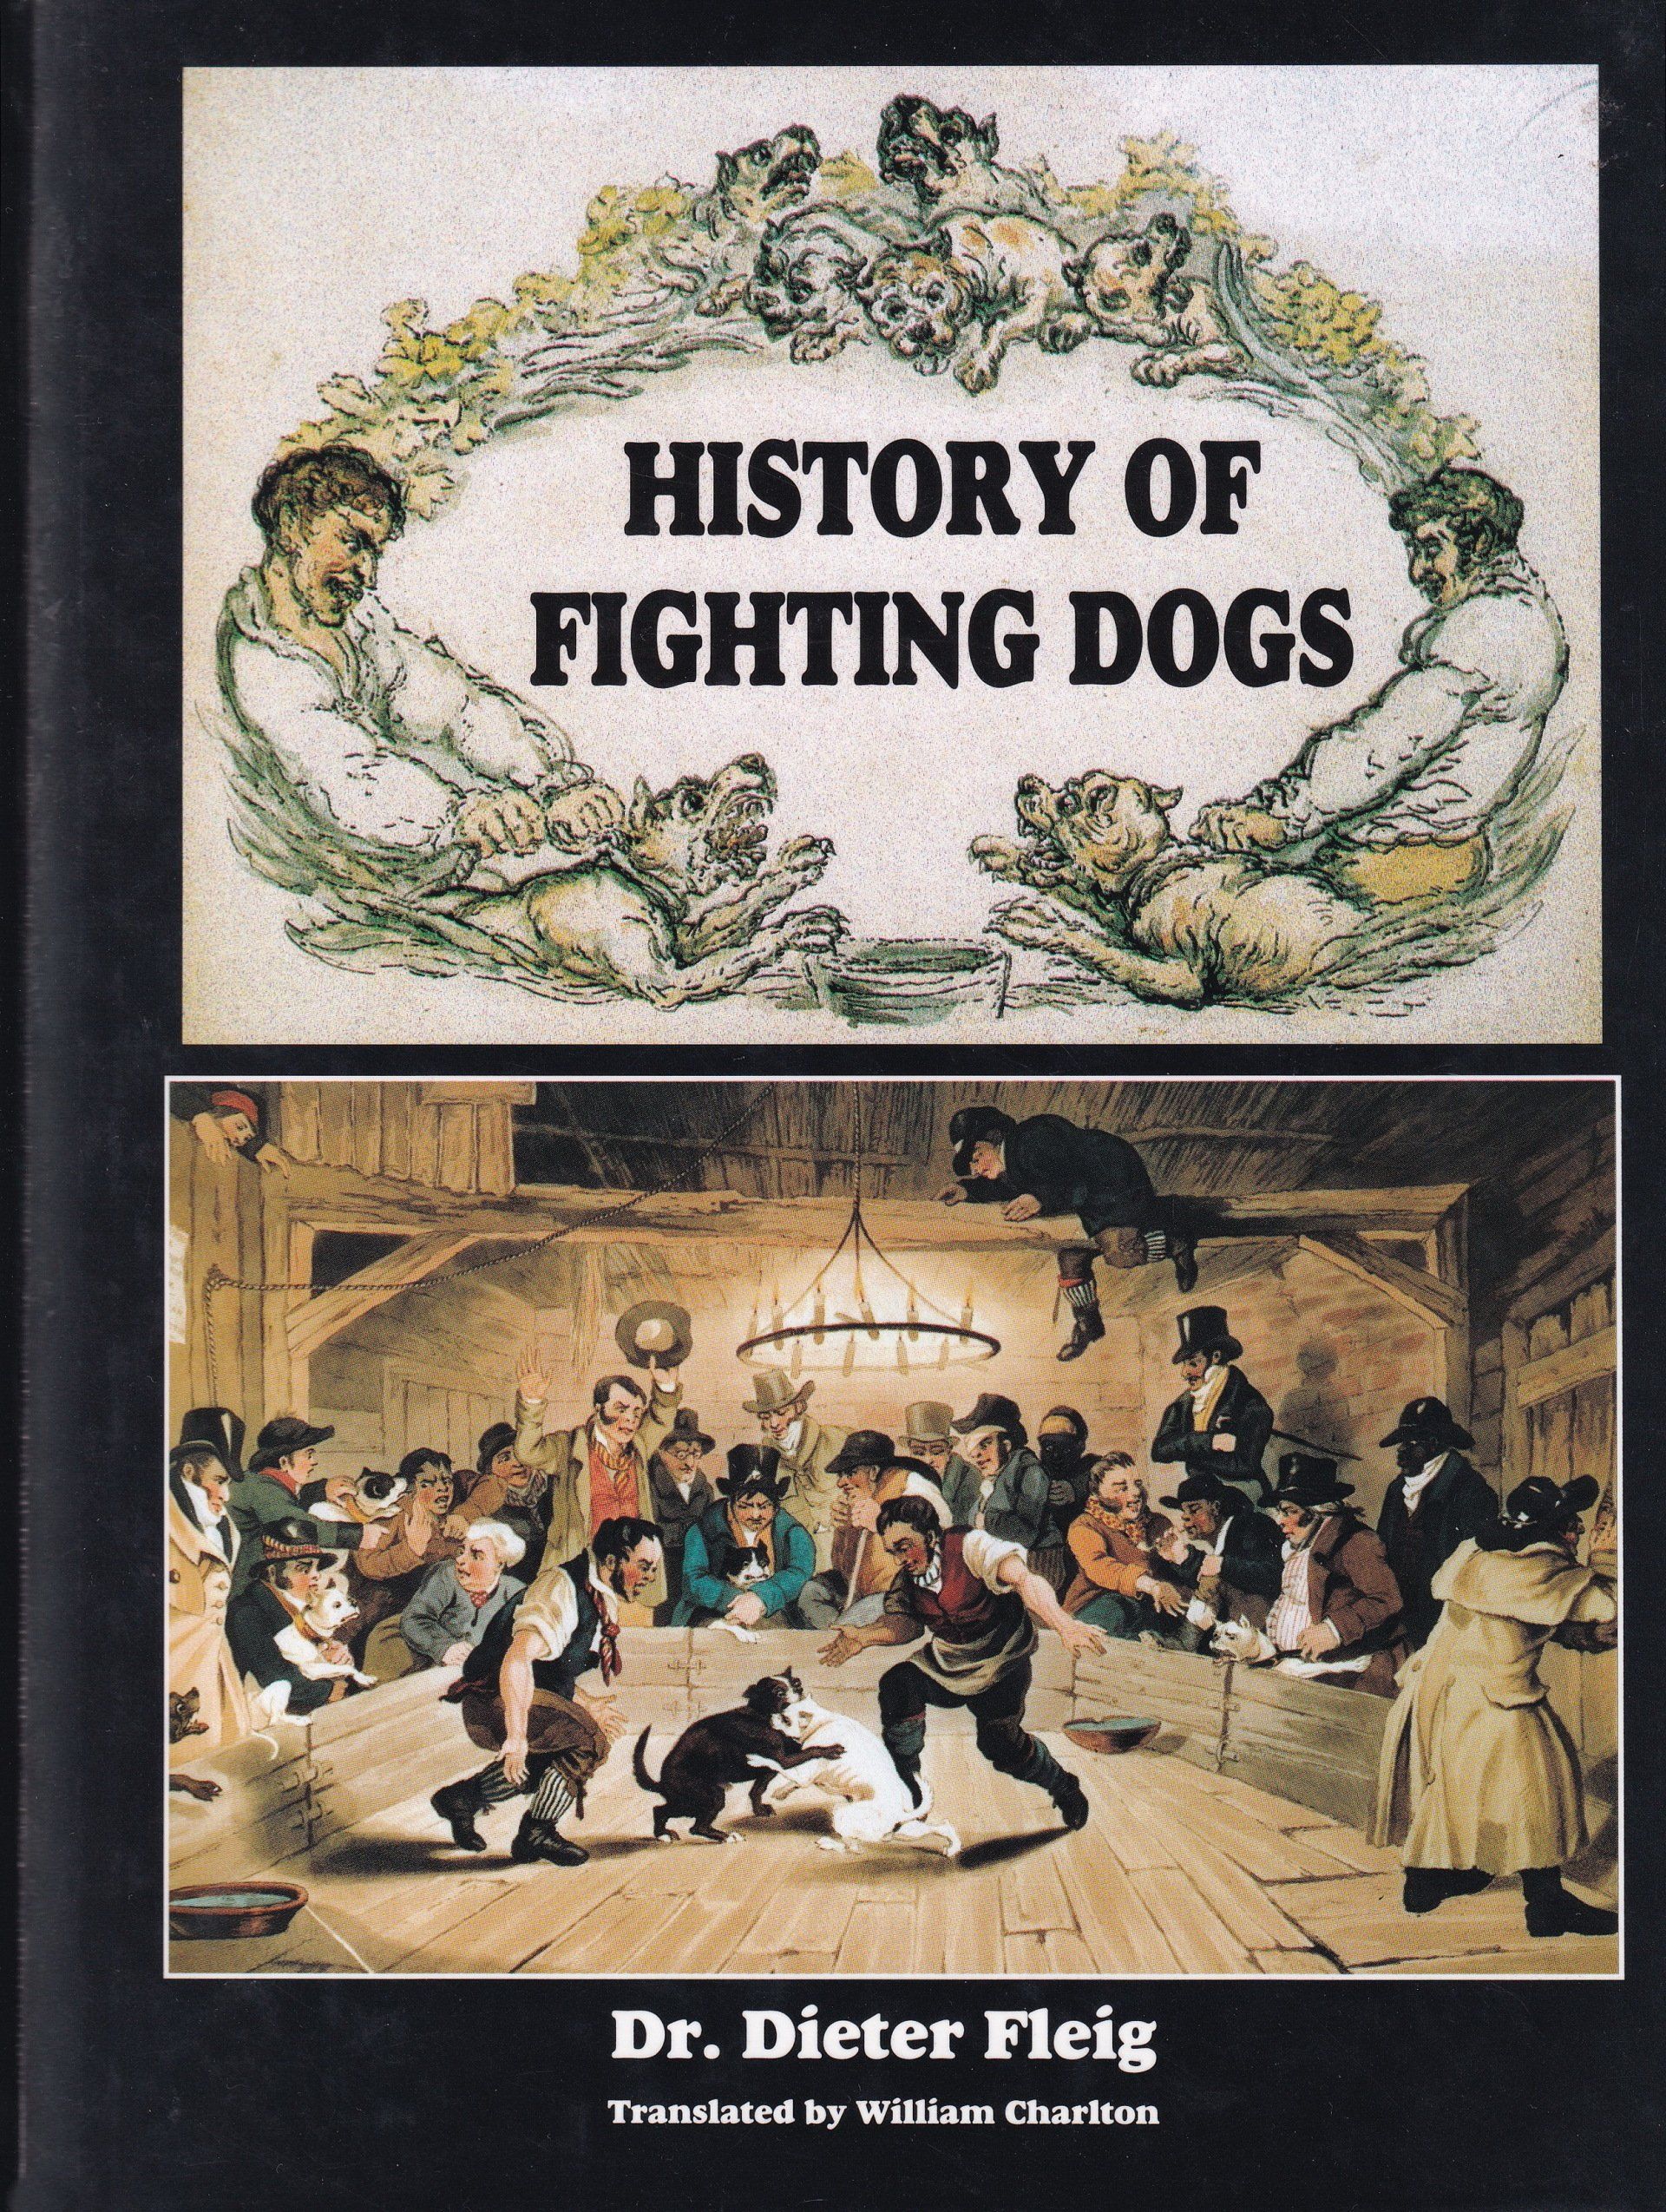 History of Fighting Dogs by Dieter Fleig